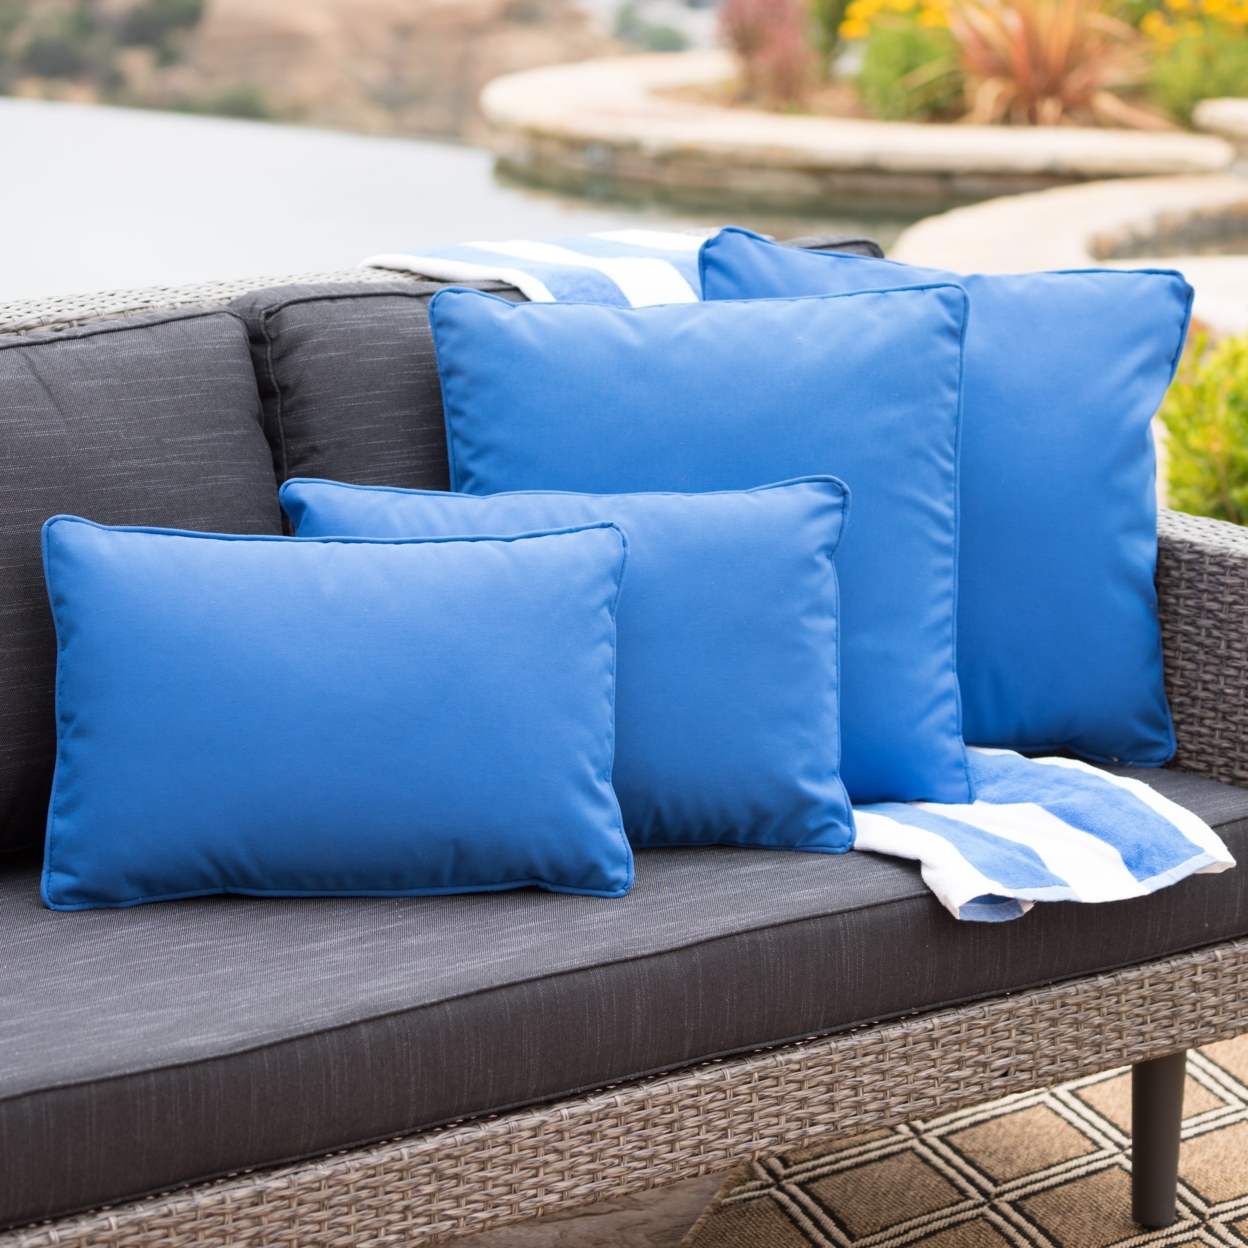 Corona Outdoor Patio Water Resistant Pillow Sets - Blue, Set Of 3